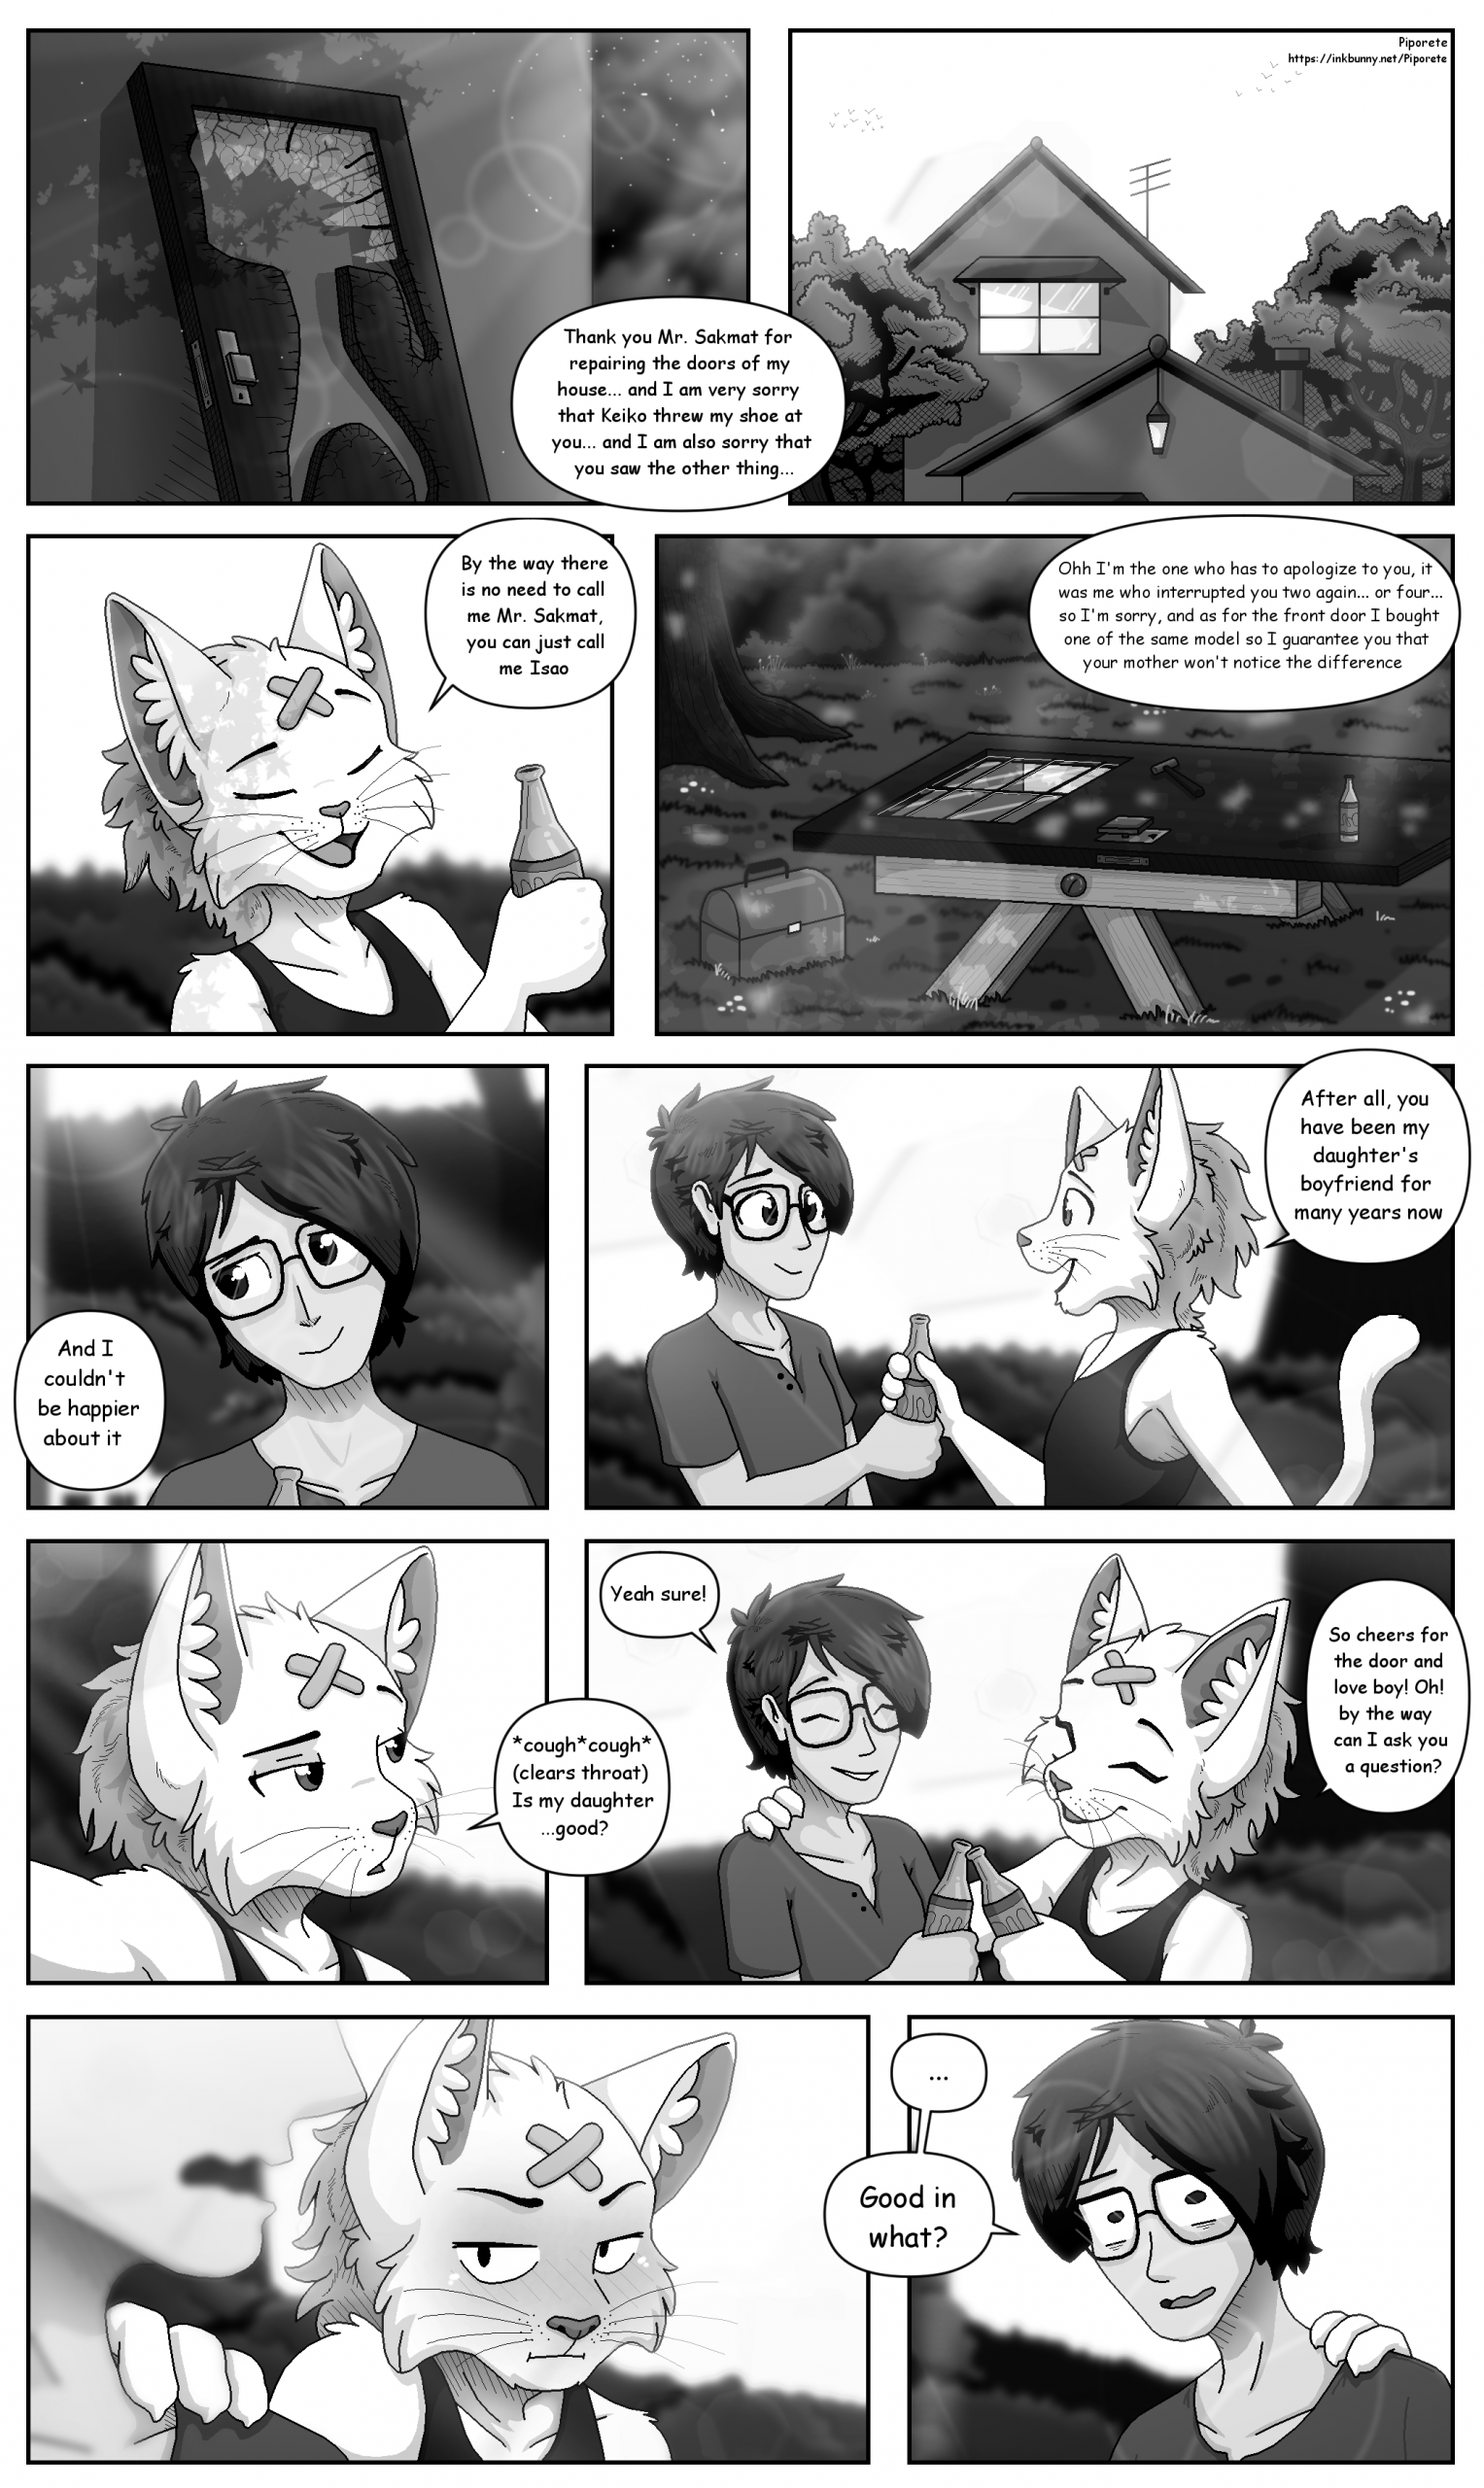 Keiko and Jin - Chapter 1 - 3 porn comic picture 56